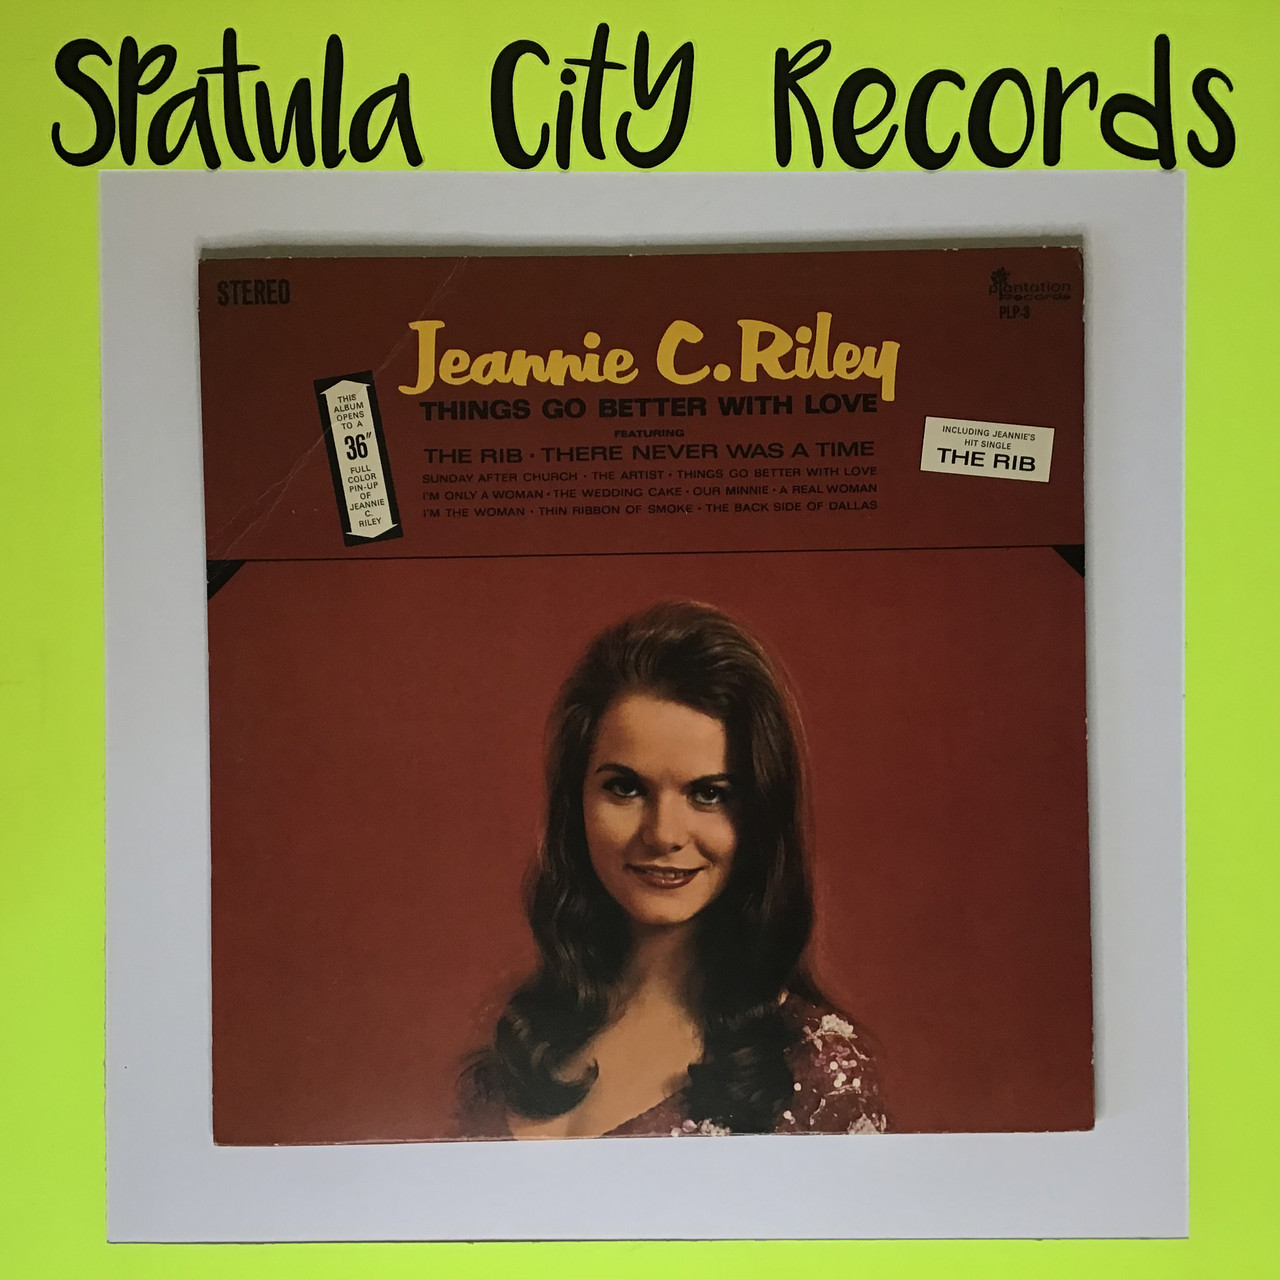 Jeannie C. Riley - Things go better with love - vinyl record album LP